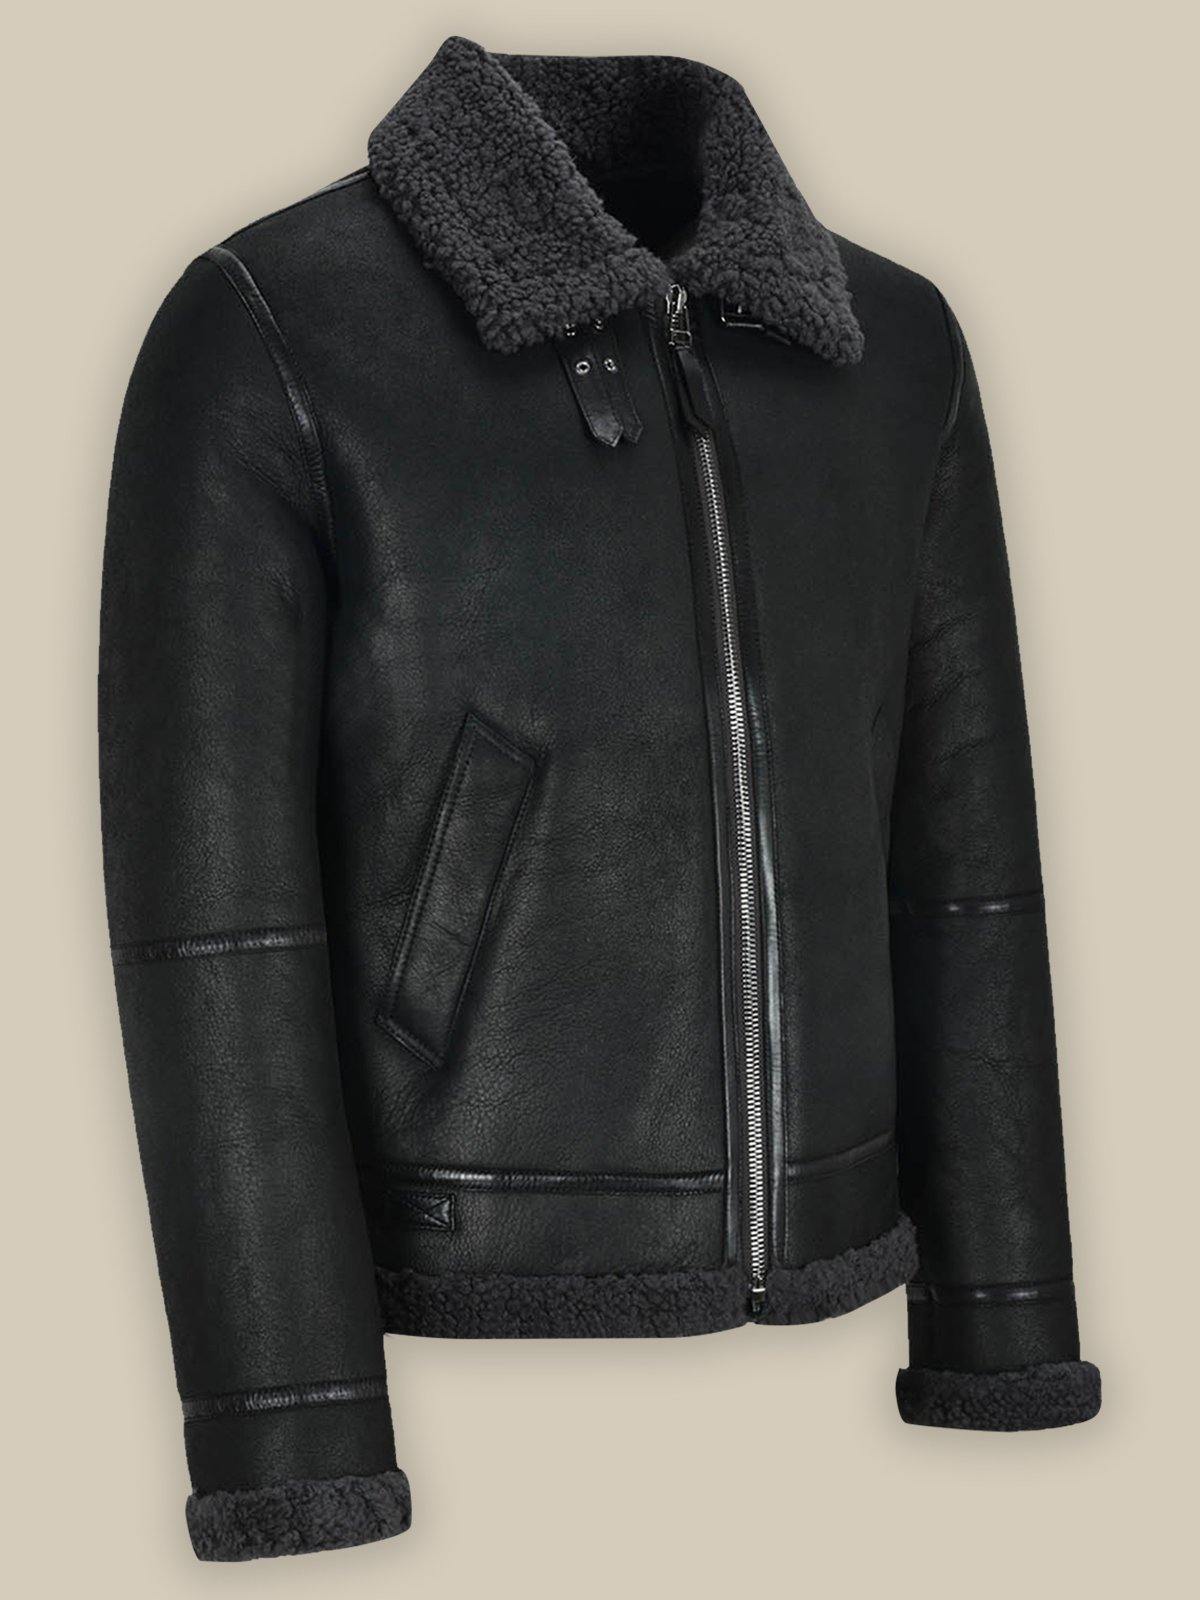 MEN’S B3 AIR FORCE SHEARLING JACKET - Wiseleather